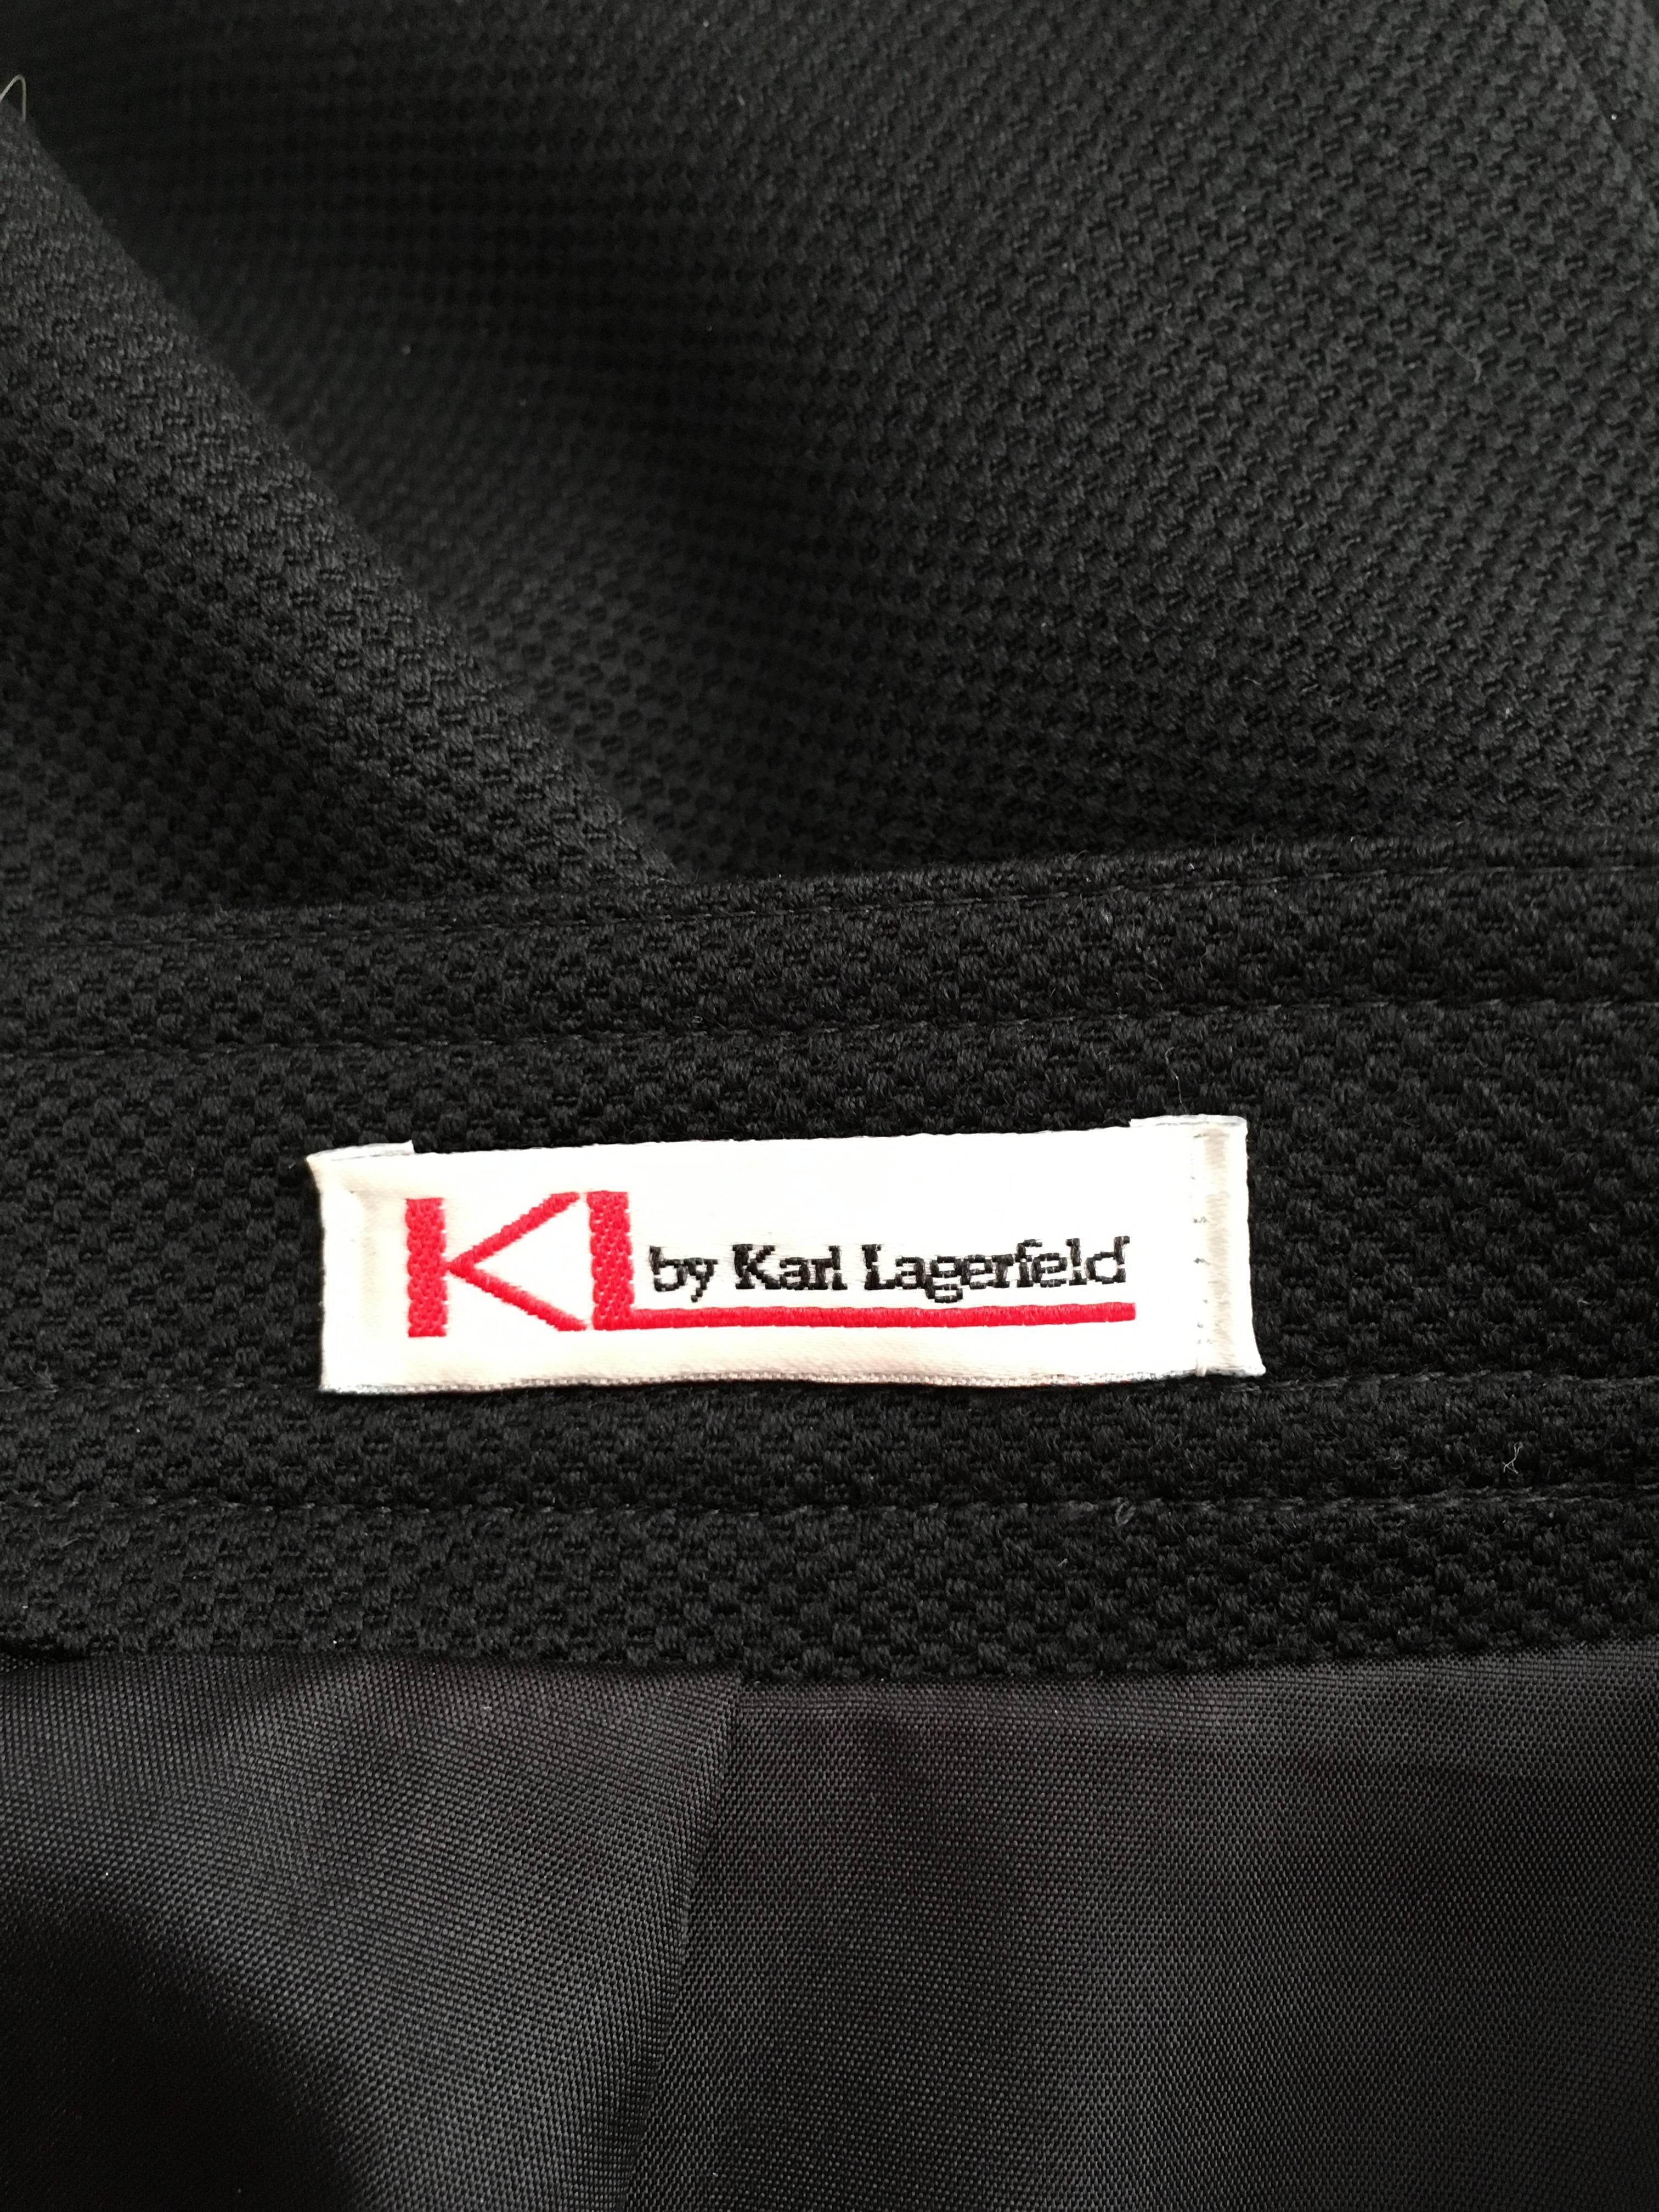 Karl Lagerfeld 1990s Black Wool Pencil Skirt Size 6. For Sale 8